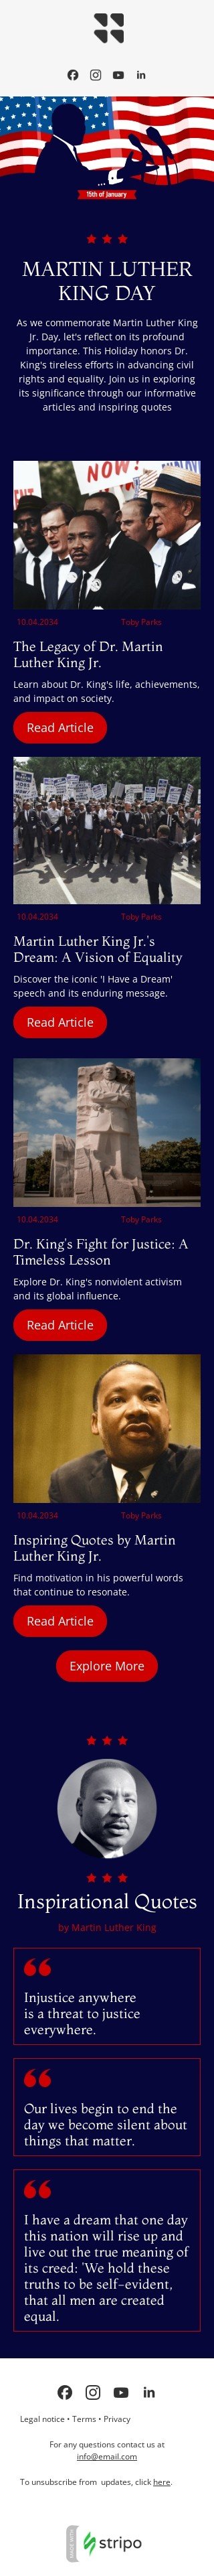 Martin Luther King Jr. Day email template "Discover the significance" for publications & blogging industry mobile view